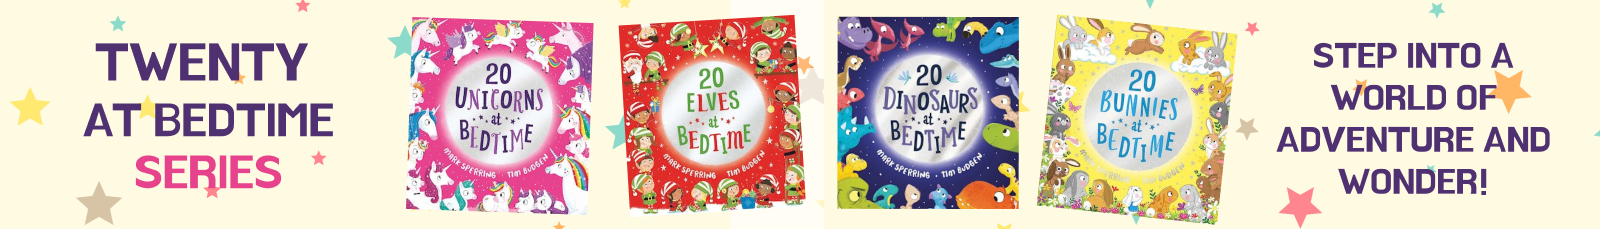 Shop Twenty at Bedtime books for kids and step into a world of adventure and wonder!